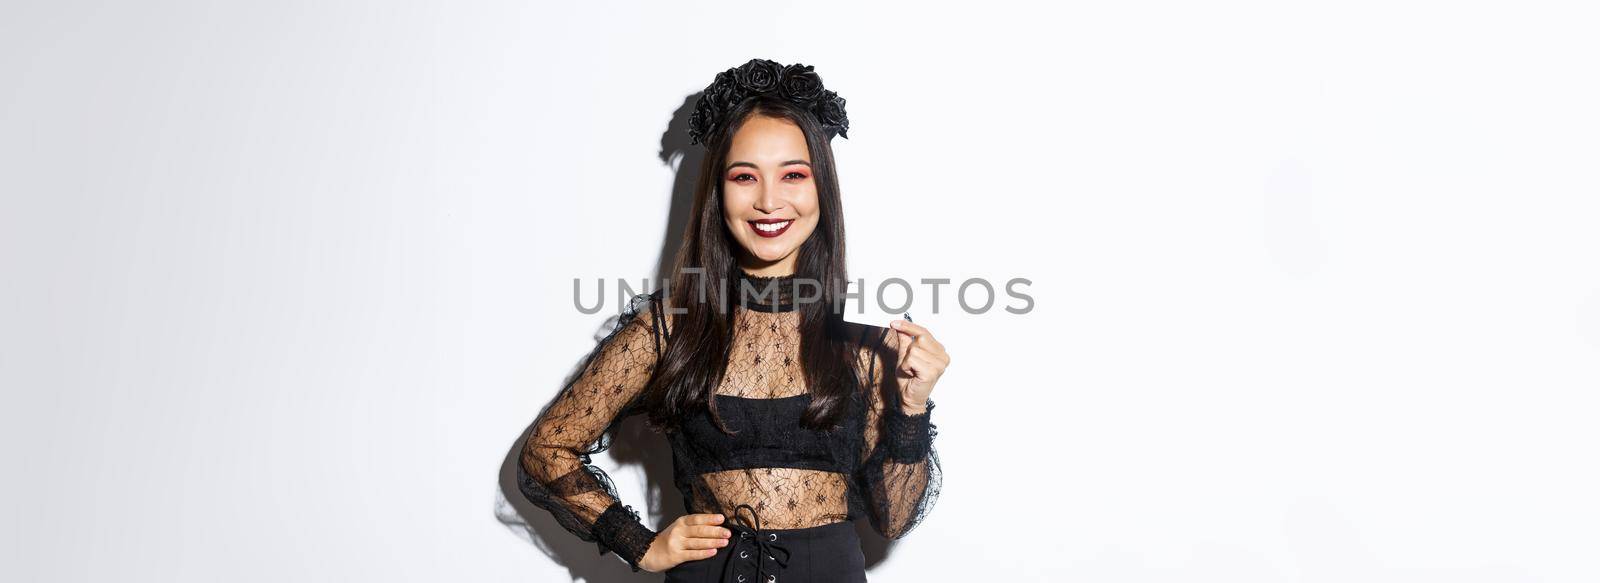 Image of beautiful asian woman in halloween costume, showing credit card and smiling, standing in gothic lace dress over white background.